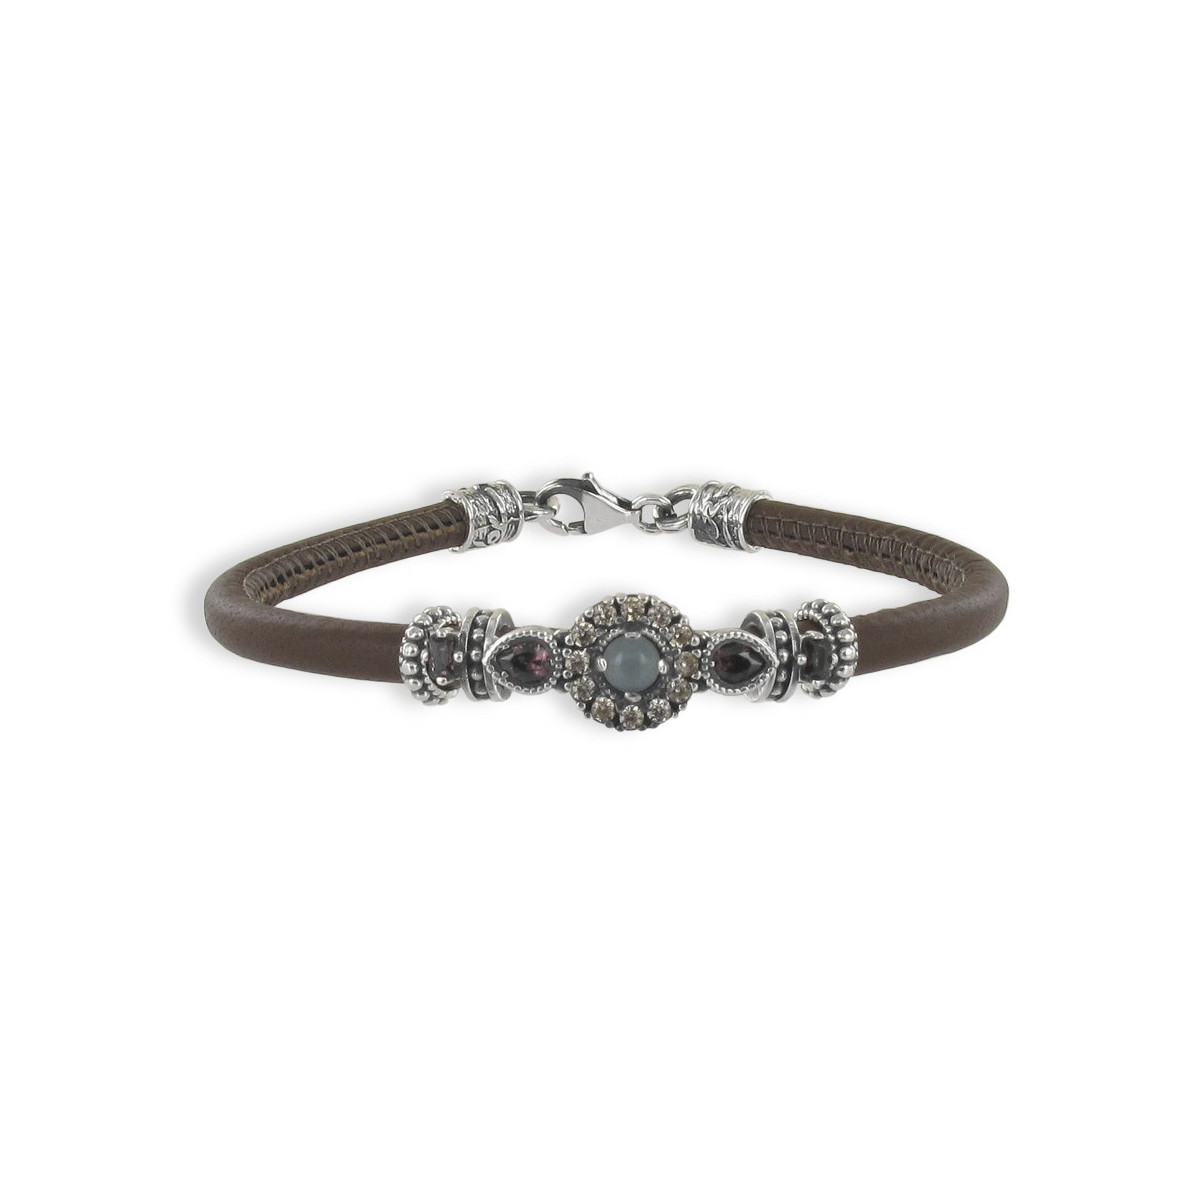 LEATHER AND SILVER BRACELET WITH STONES